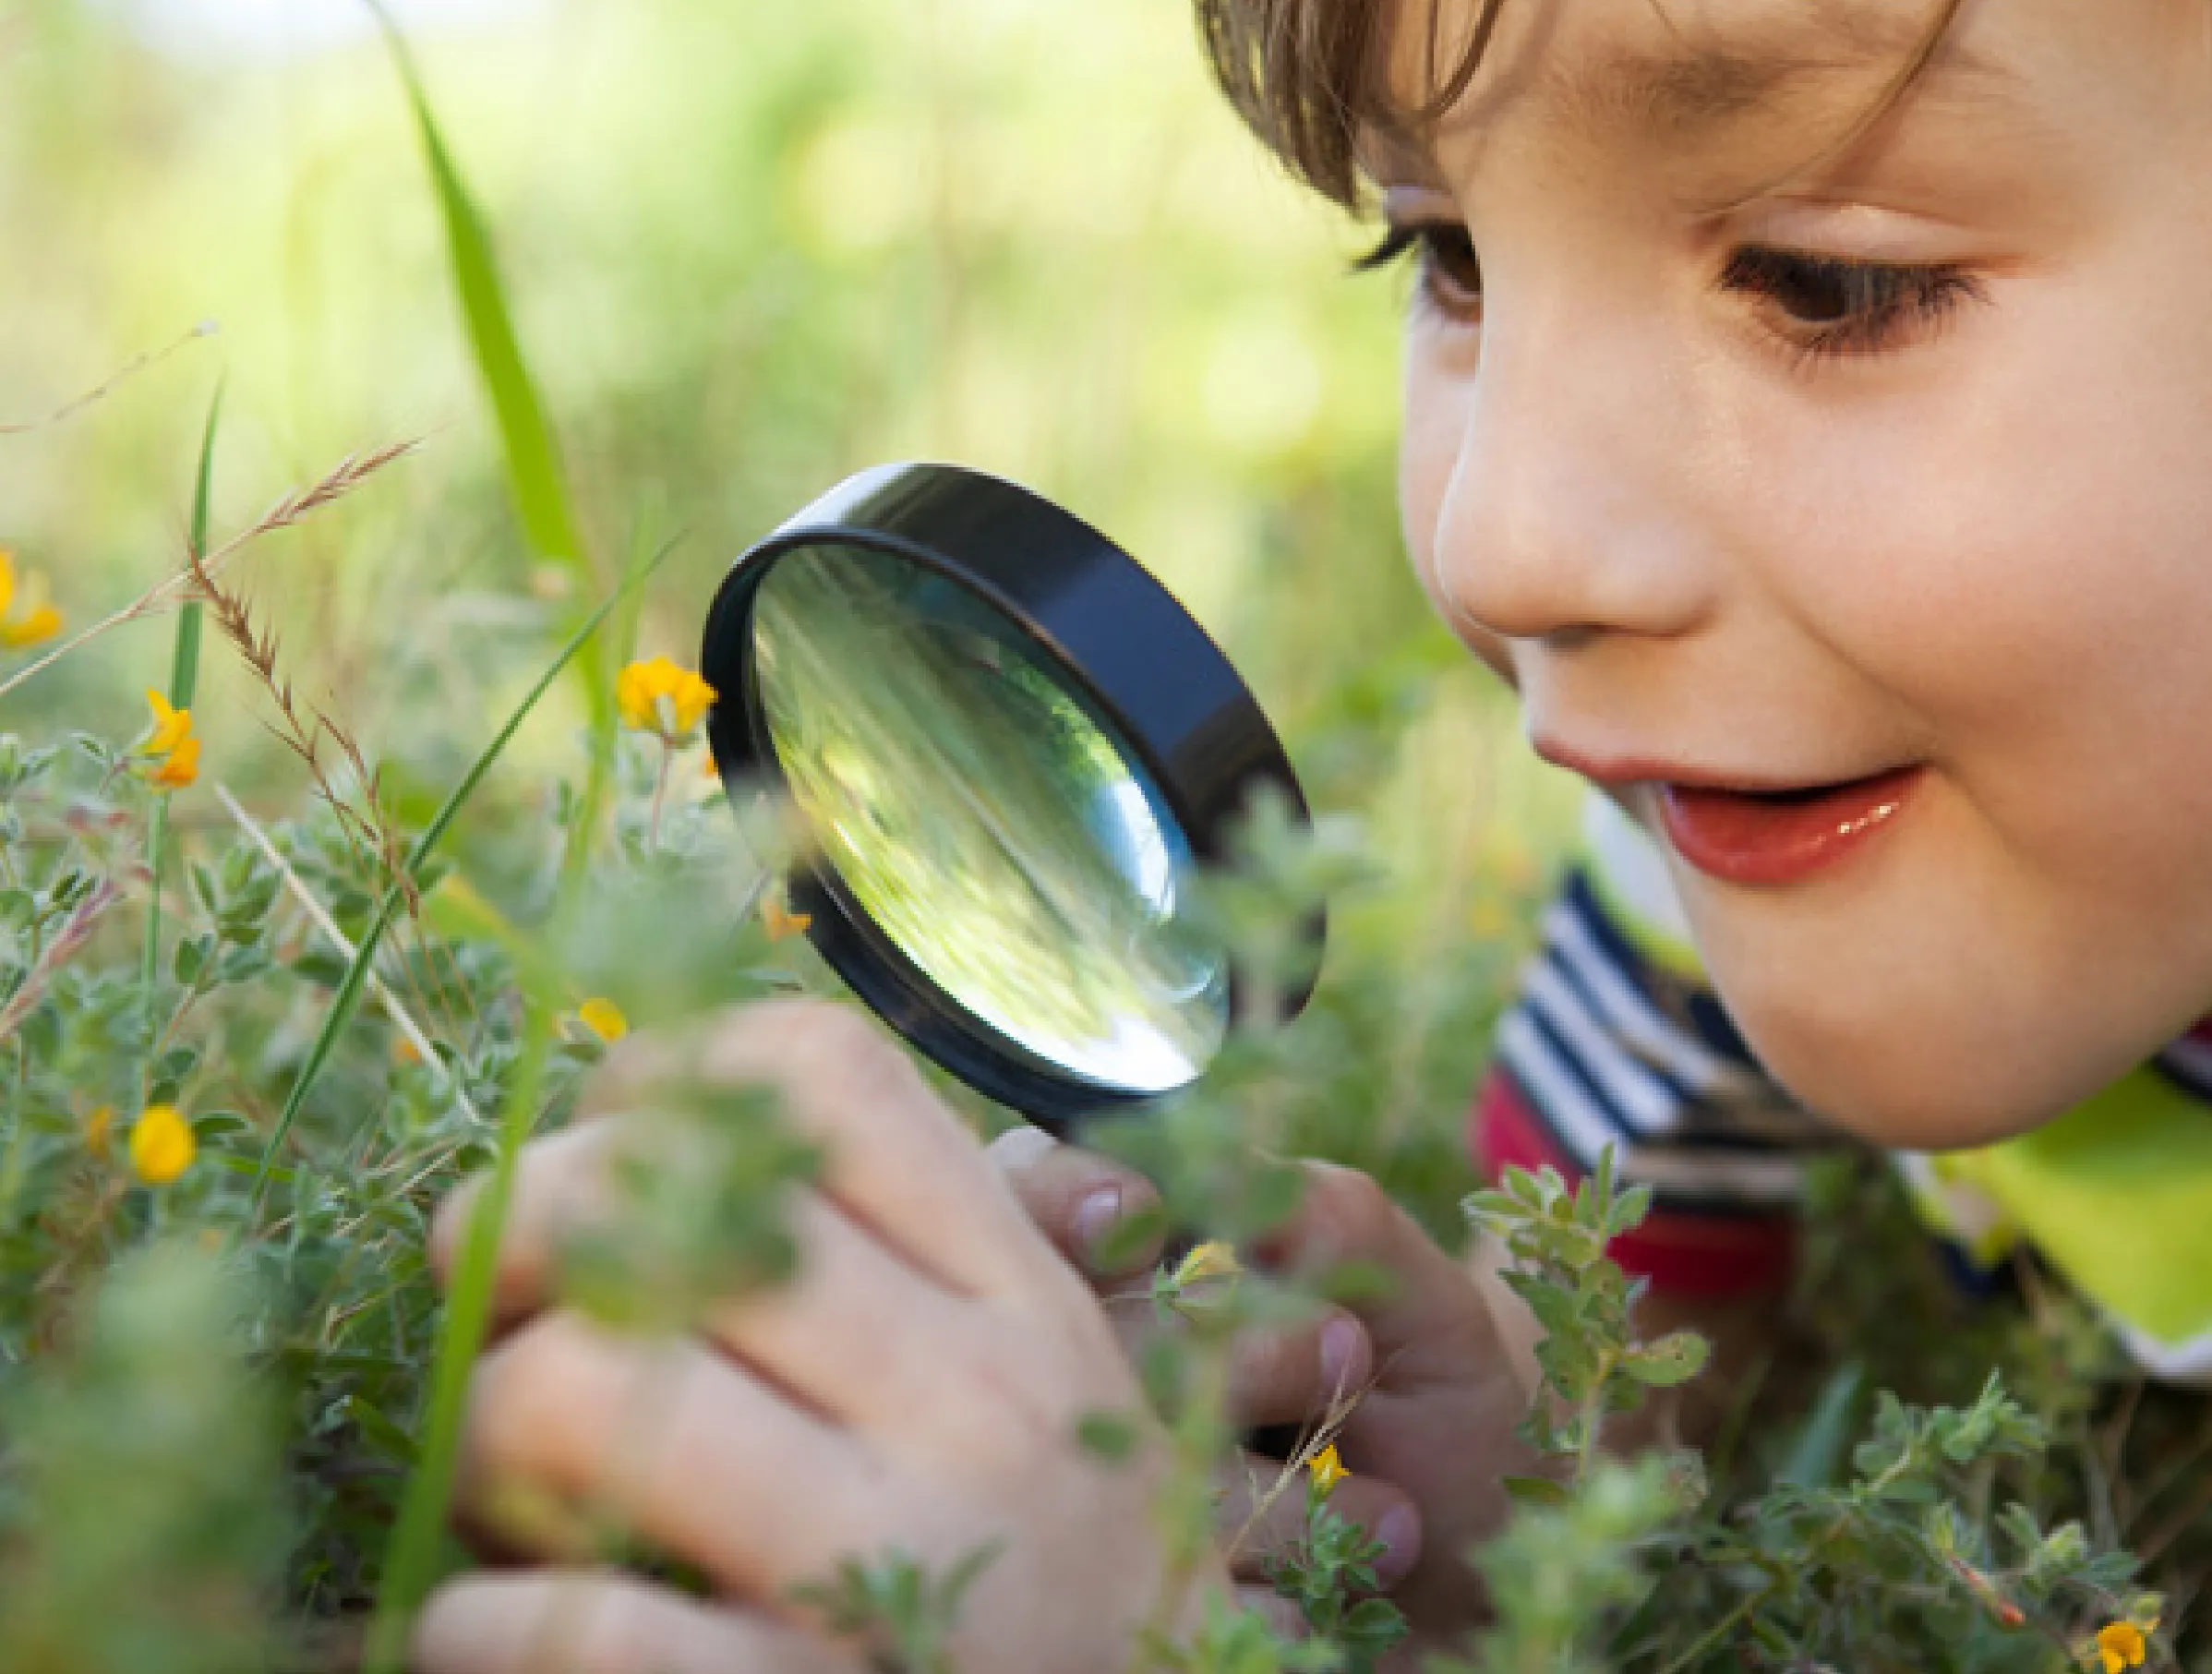 Child inspecting flowers with a microscope